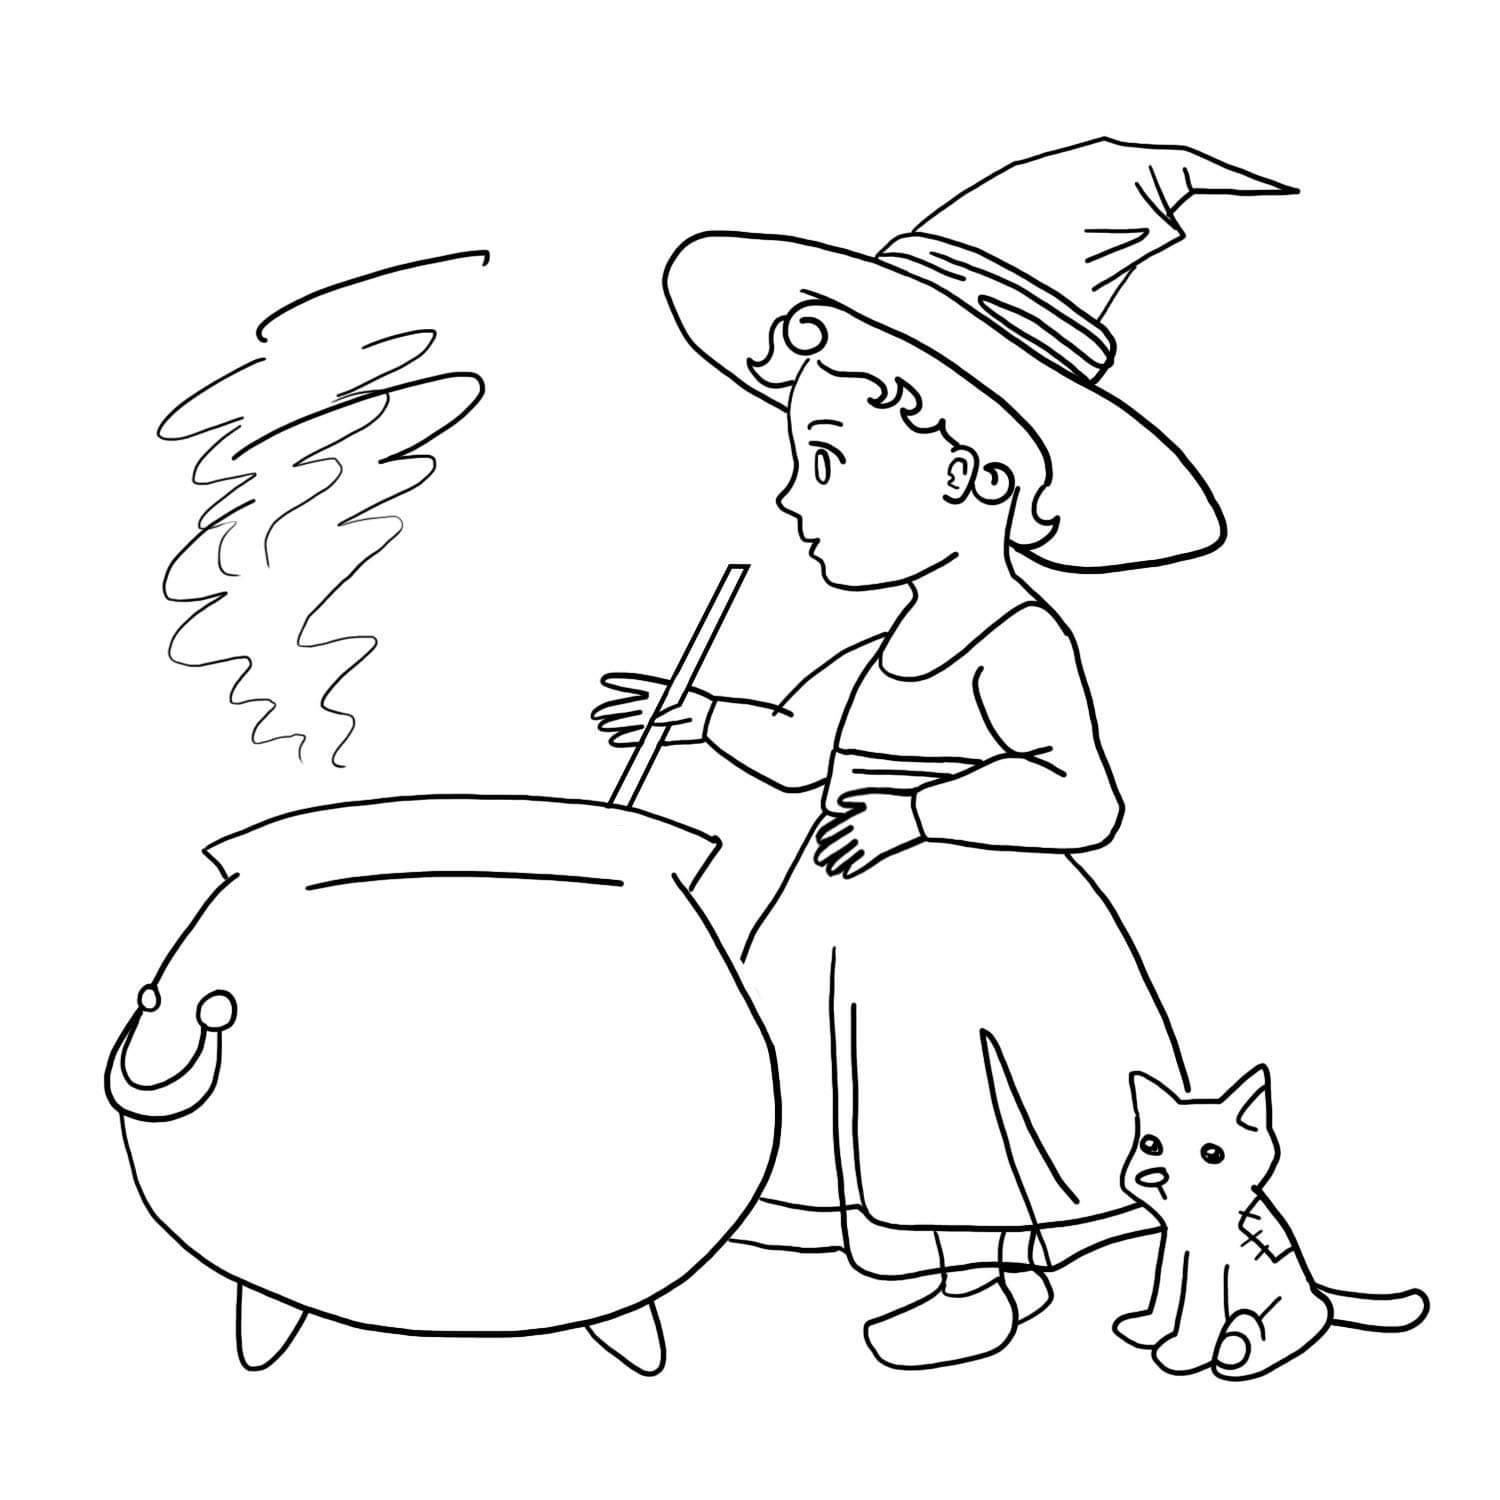 1. Poisonous Baby witch is brewing up some noxious concoction to keep the rainy day roaches away!